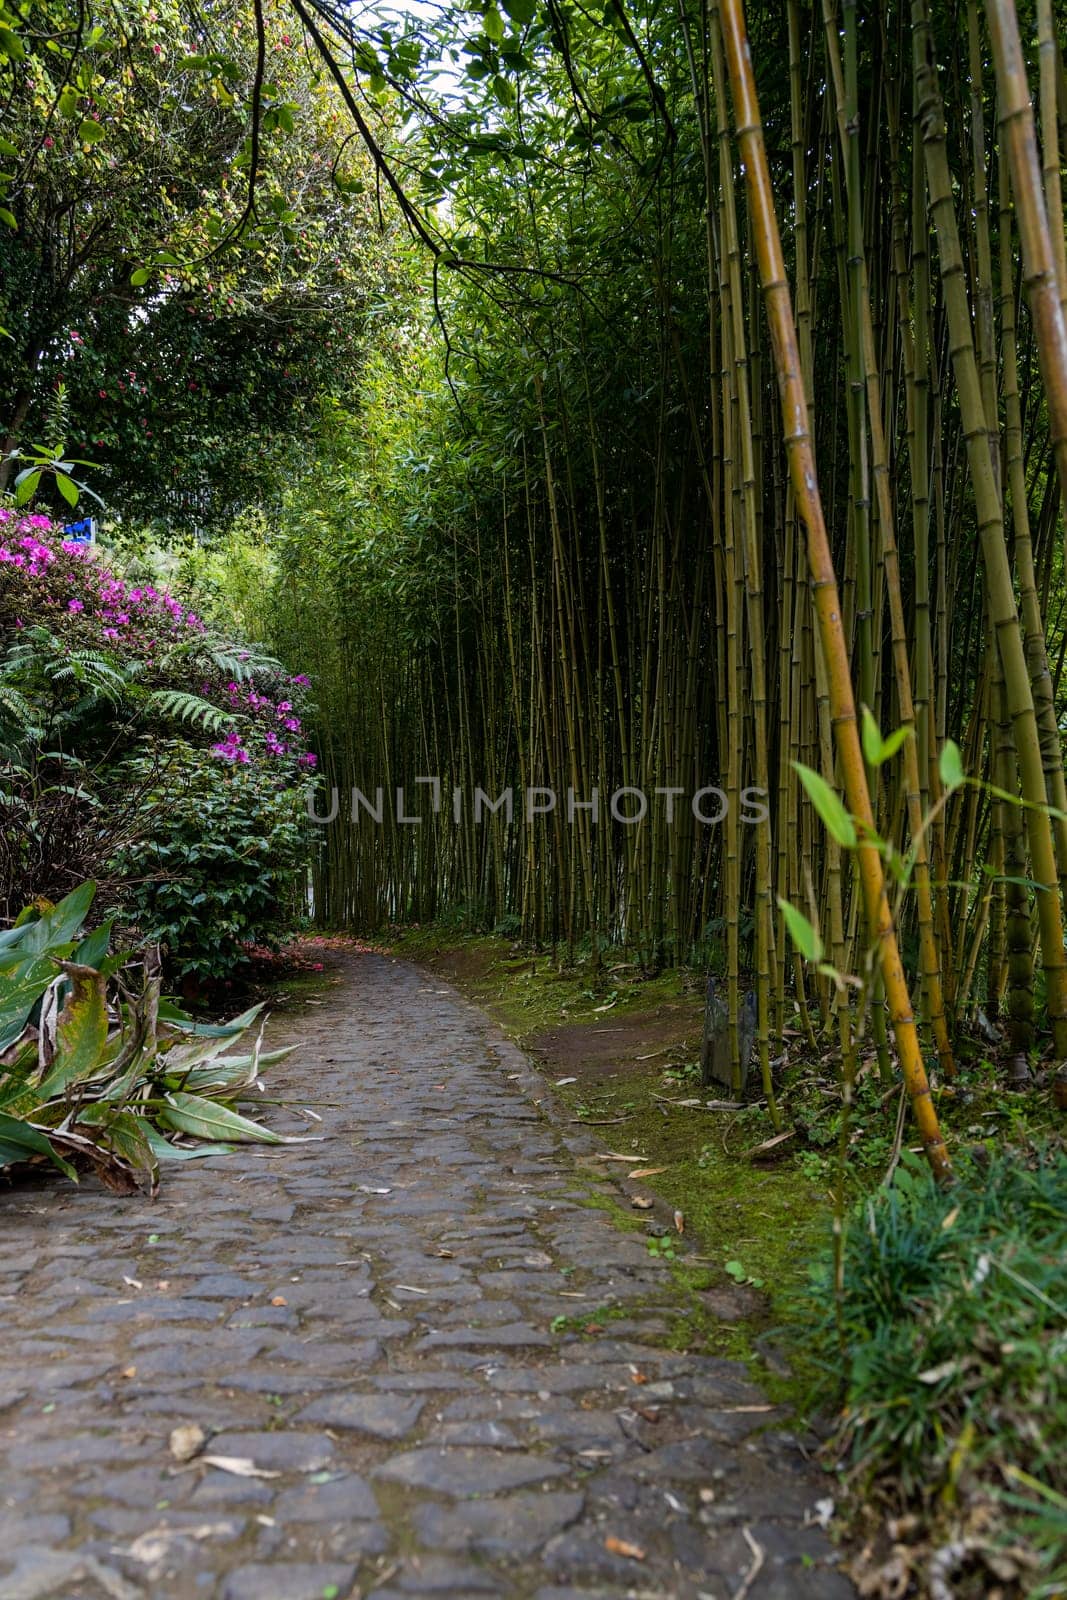 A winding pathway lined with lush greenery leads up to a bamboo forest, where bright blooming shrubs dot the picturesque landscape